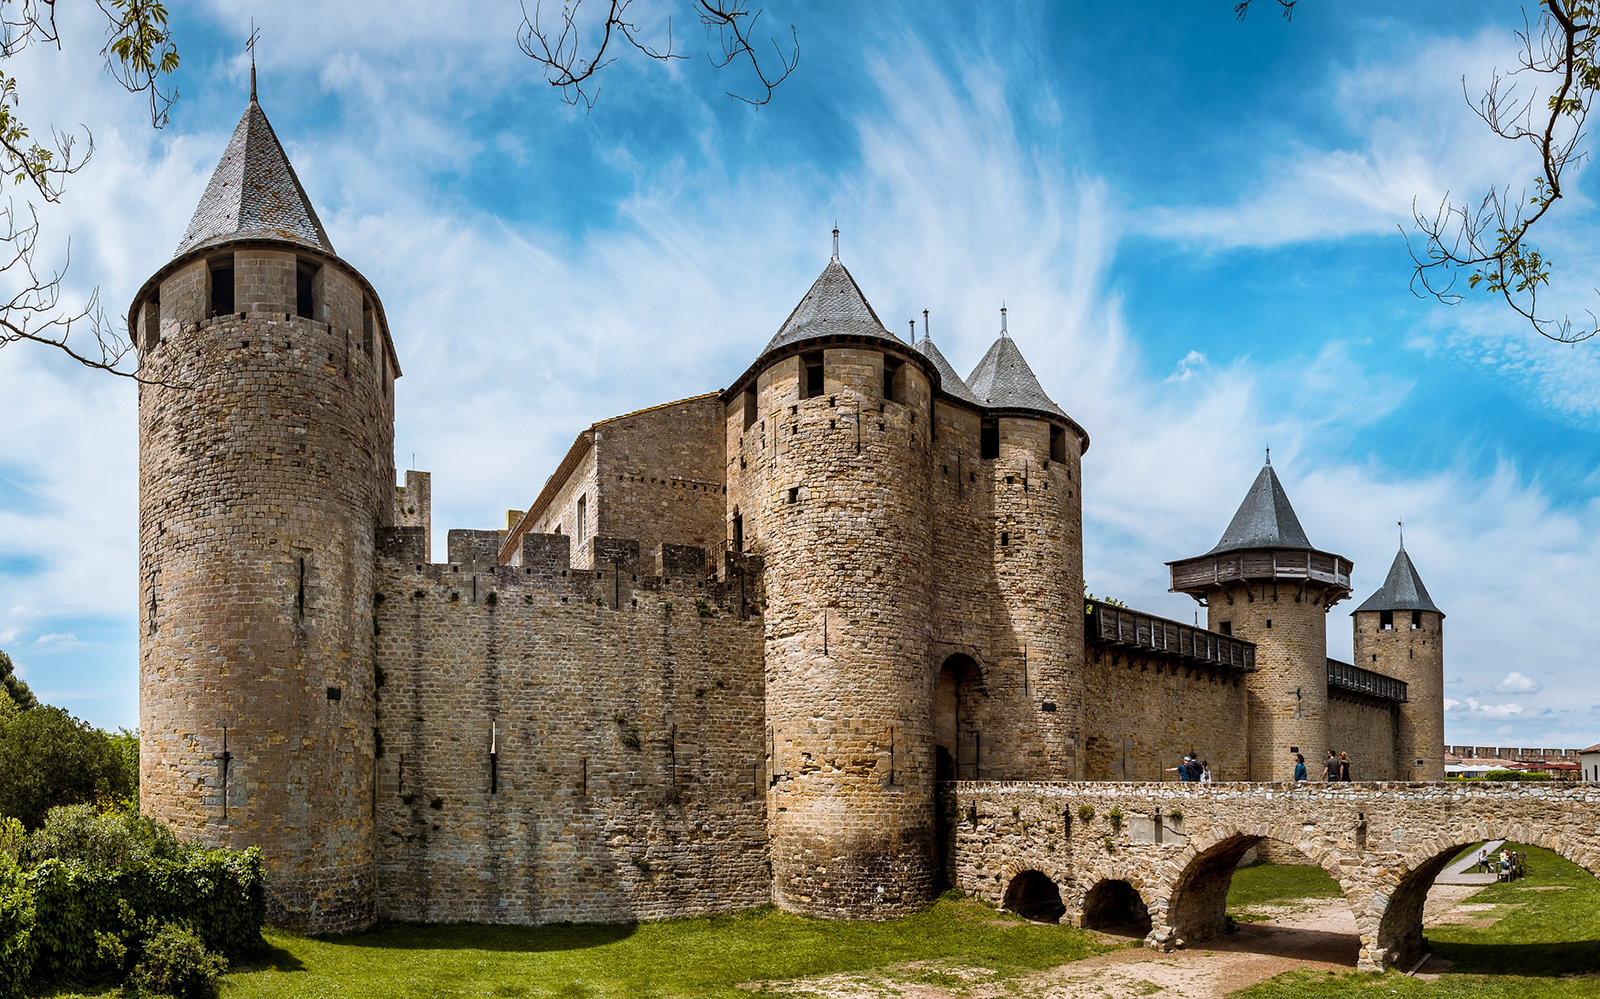 Image of Skip-the-Line Tickets to Carcassonne Castle & Ramparts